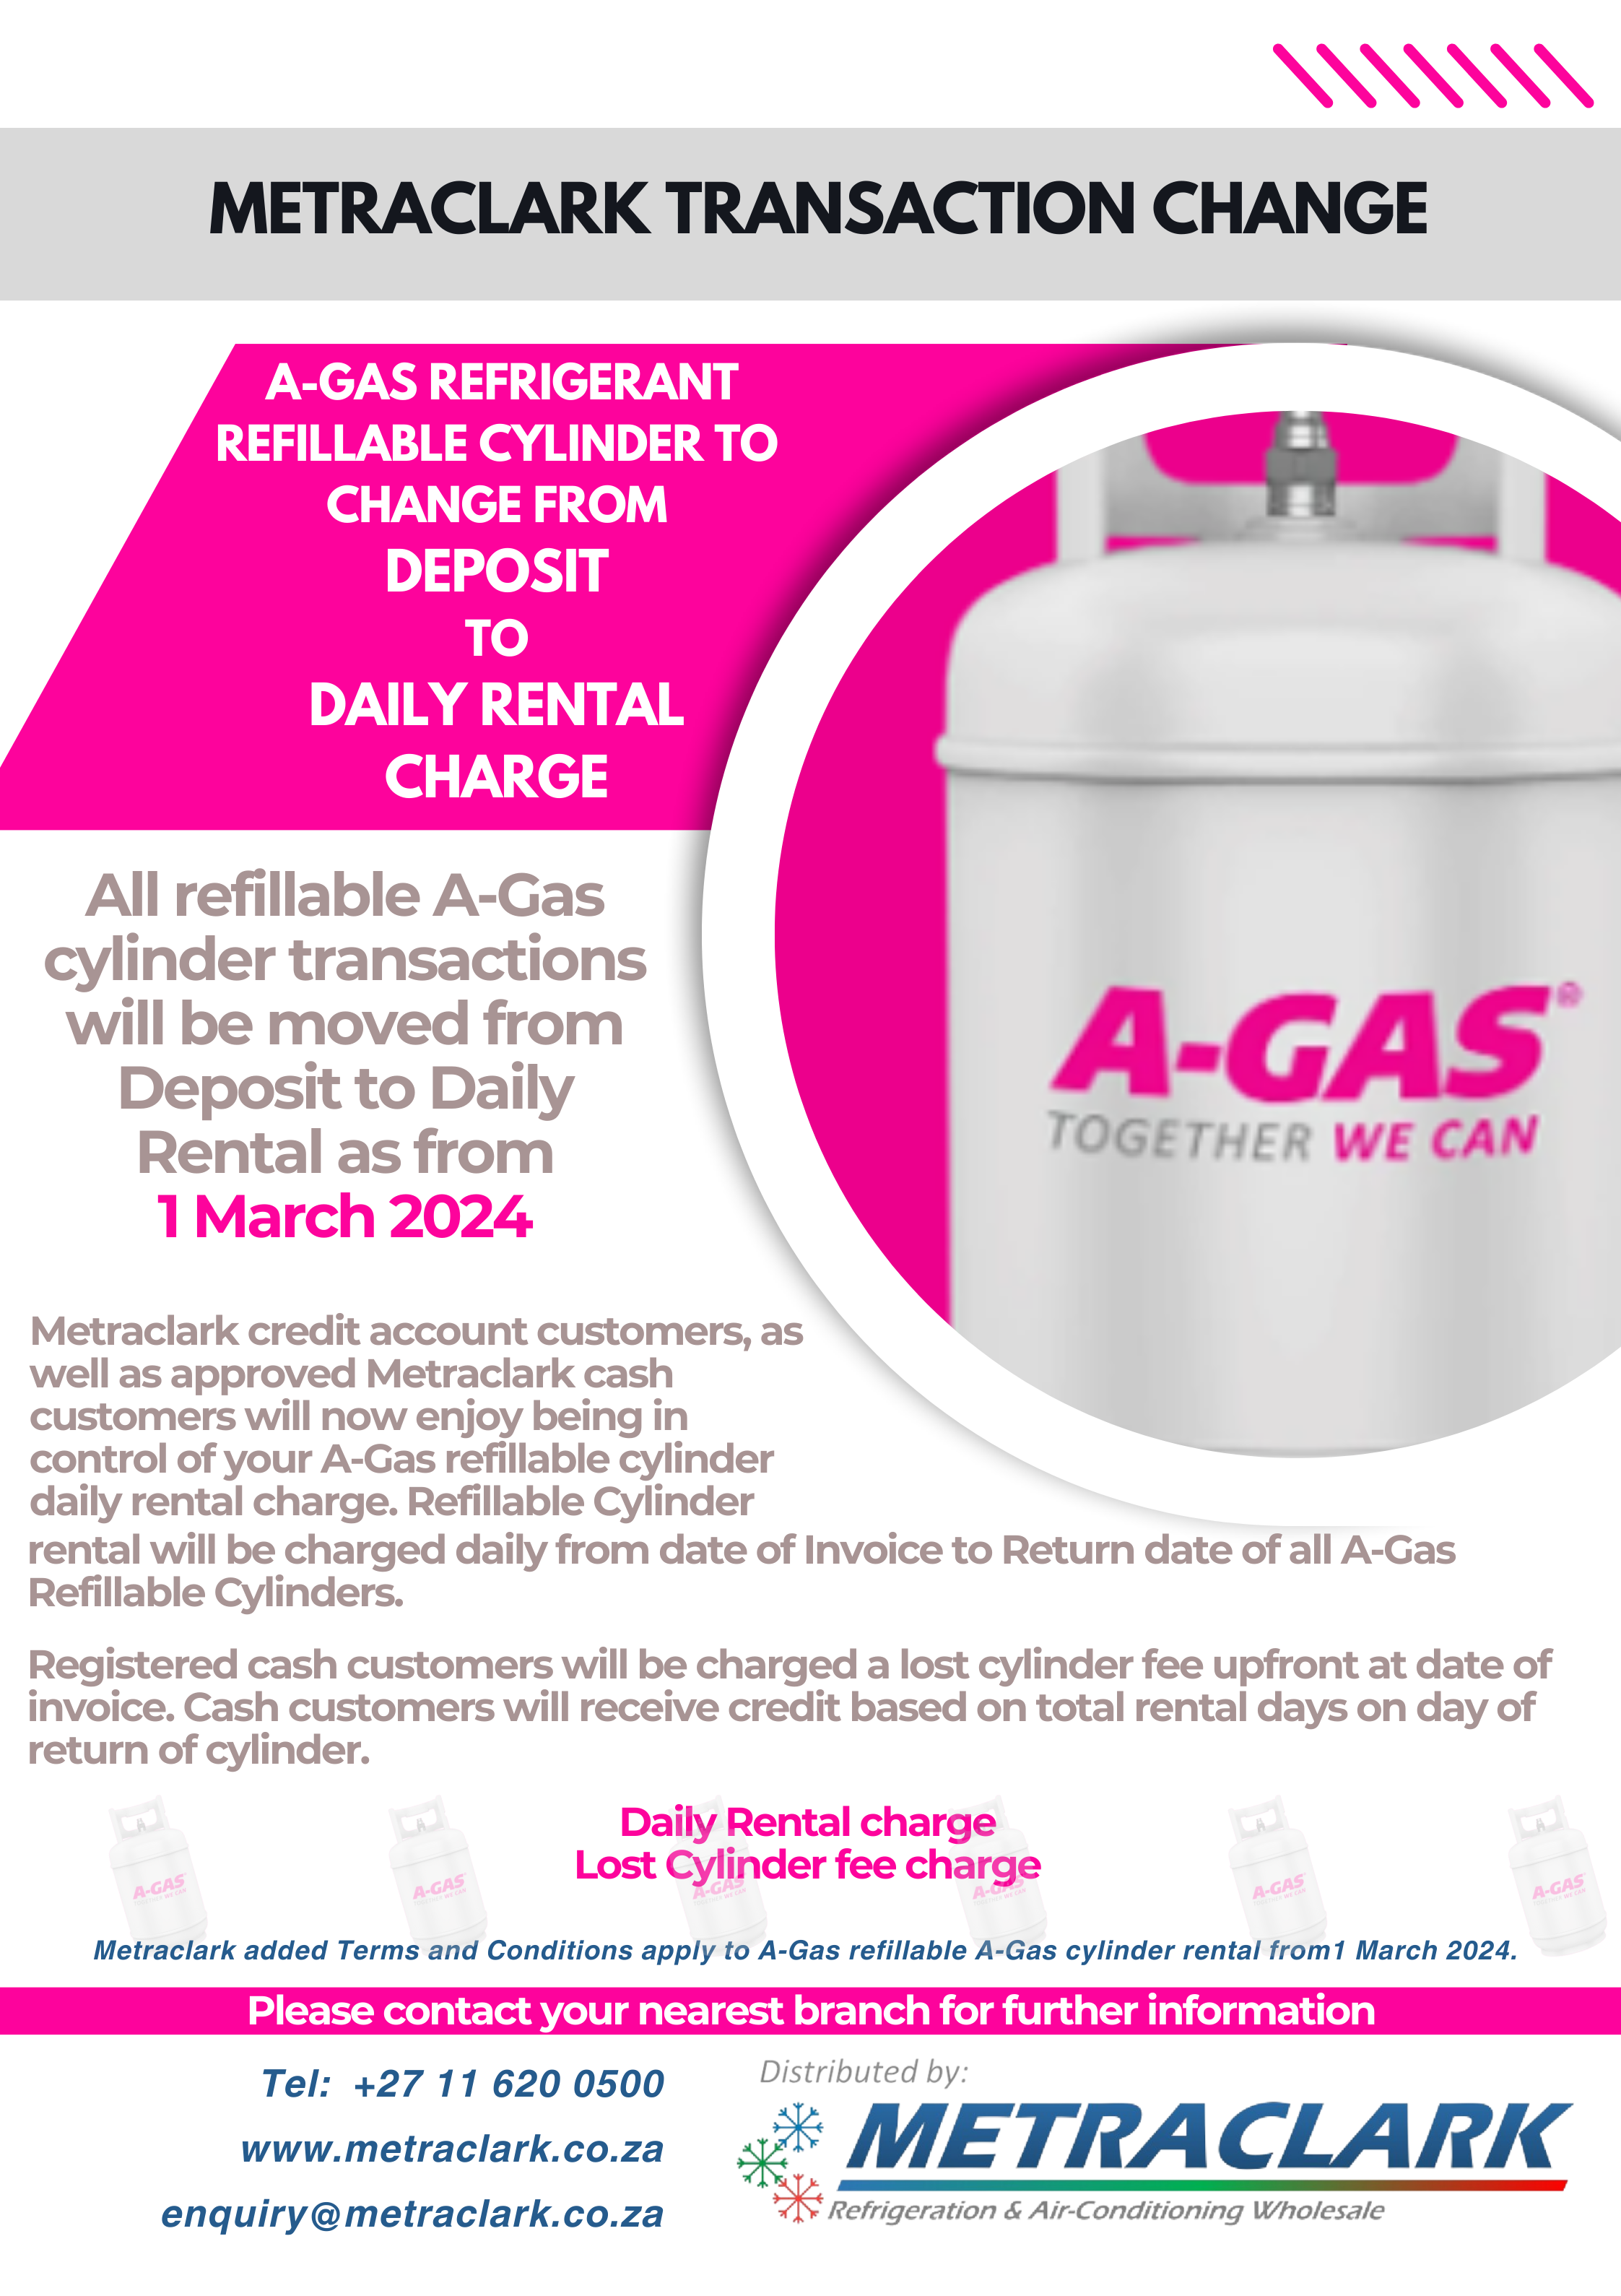 All refillable A-Gas cylinder transactions will be moved from Deposit to Daily Rental as from 1 March 2024.